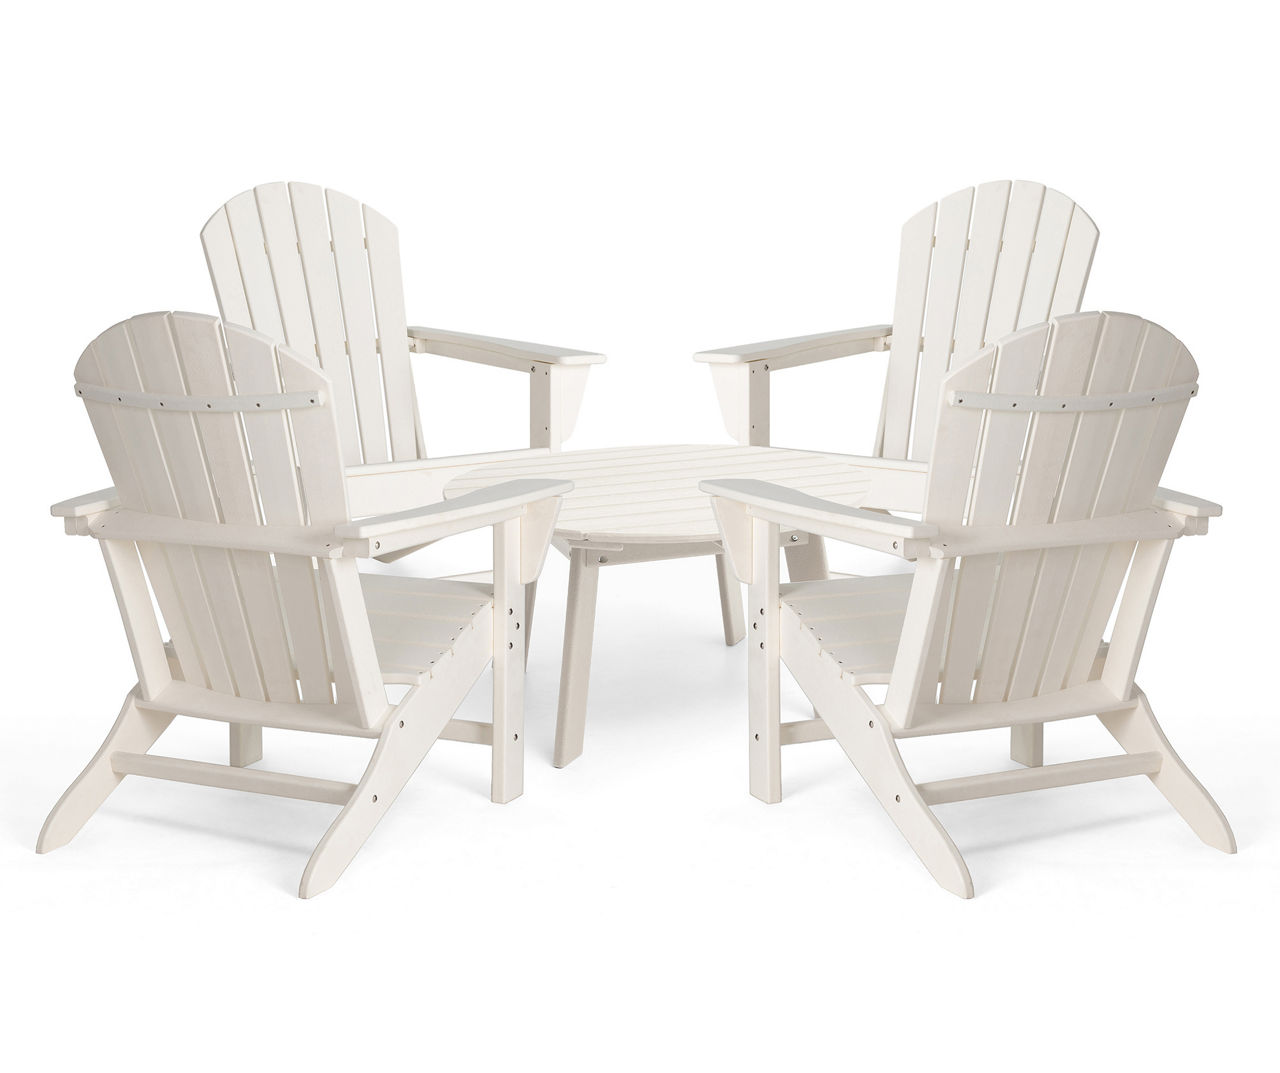 5-Piece Outdoor Patio White HDPE Adirondack Chair and Coffee Table Set1pc 32"D Coffee Table4pcs Adirondack Chairs (KD)